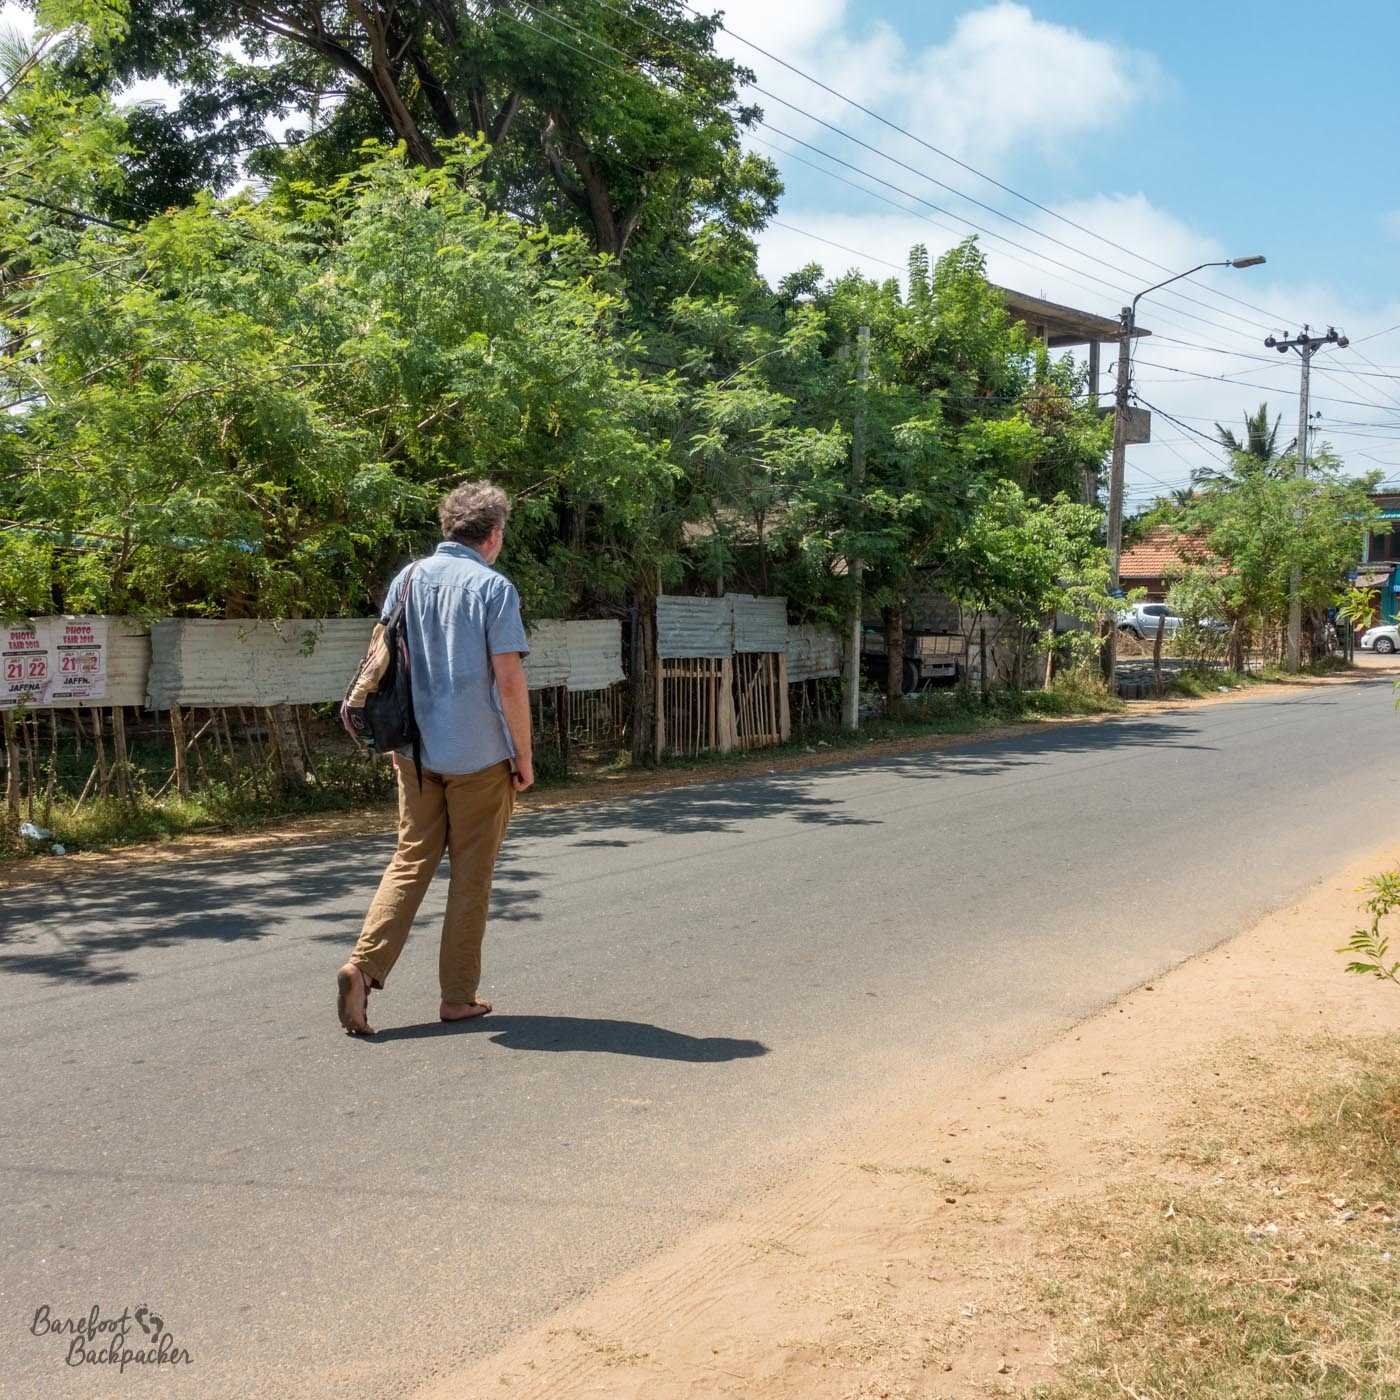 Walking down a street in Jaffna, Sri Lanka. Wearing a blue shirt, brown trousers, and the brown crochet barefoot sandals. However from this angle, it's clear, with the left foot up, on the toes, that the sole of the foot is bare and the sandals only cover the top. The road is dry tarmac, slightly dusty at the right edge, while the left side, behind the man, is lined with trees and wooden fences.